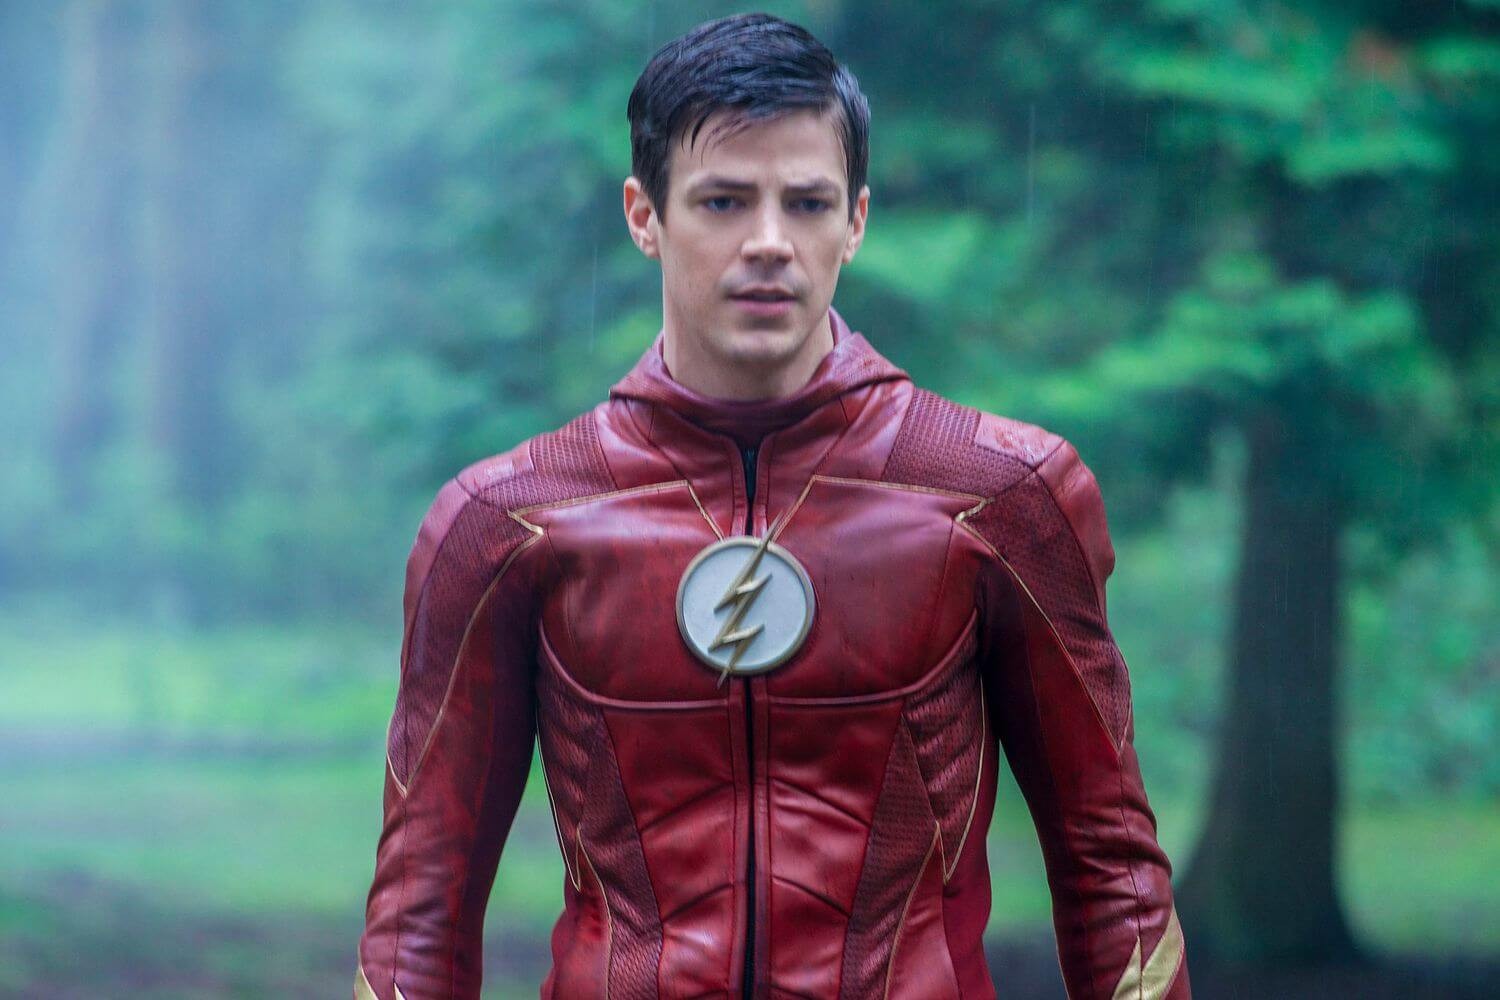 Grant Gustin as Barry Allen in The CW series The Flash